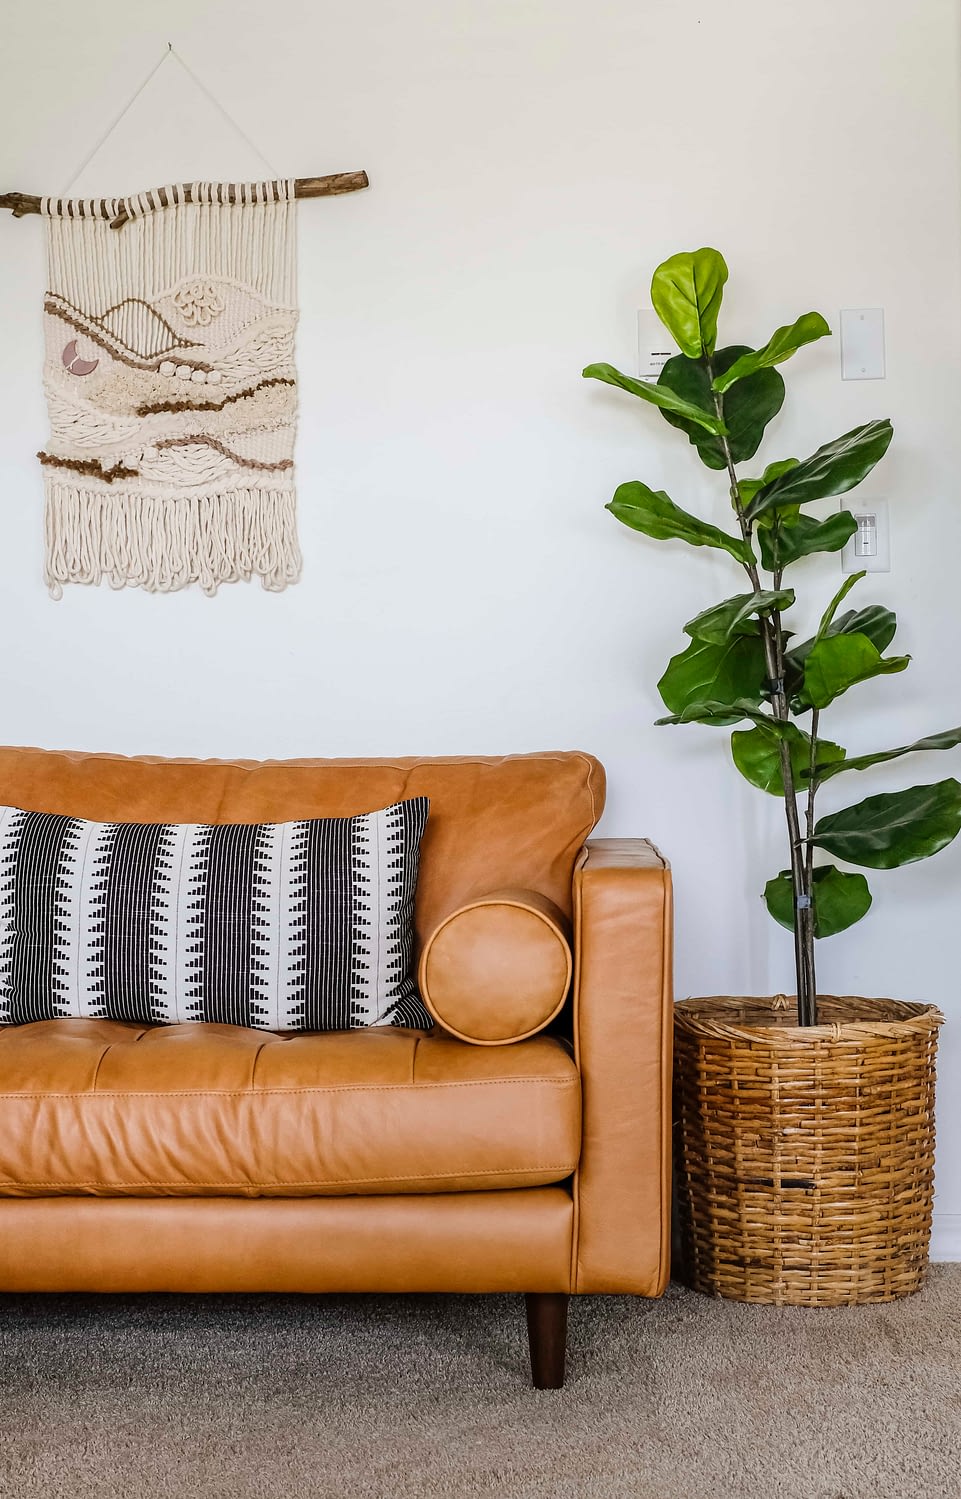 faux fiddle leaf fig tree standing next to a leather couch